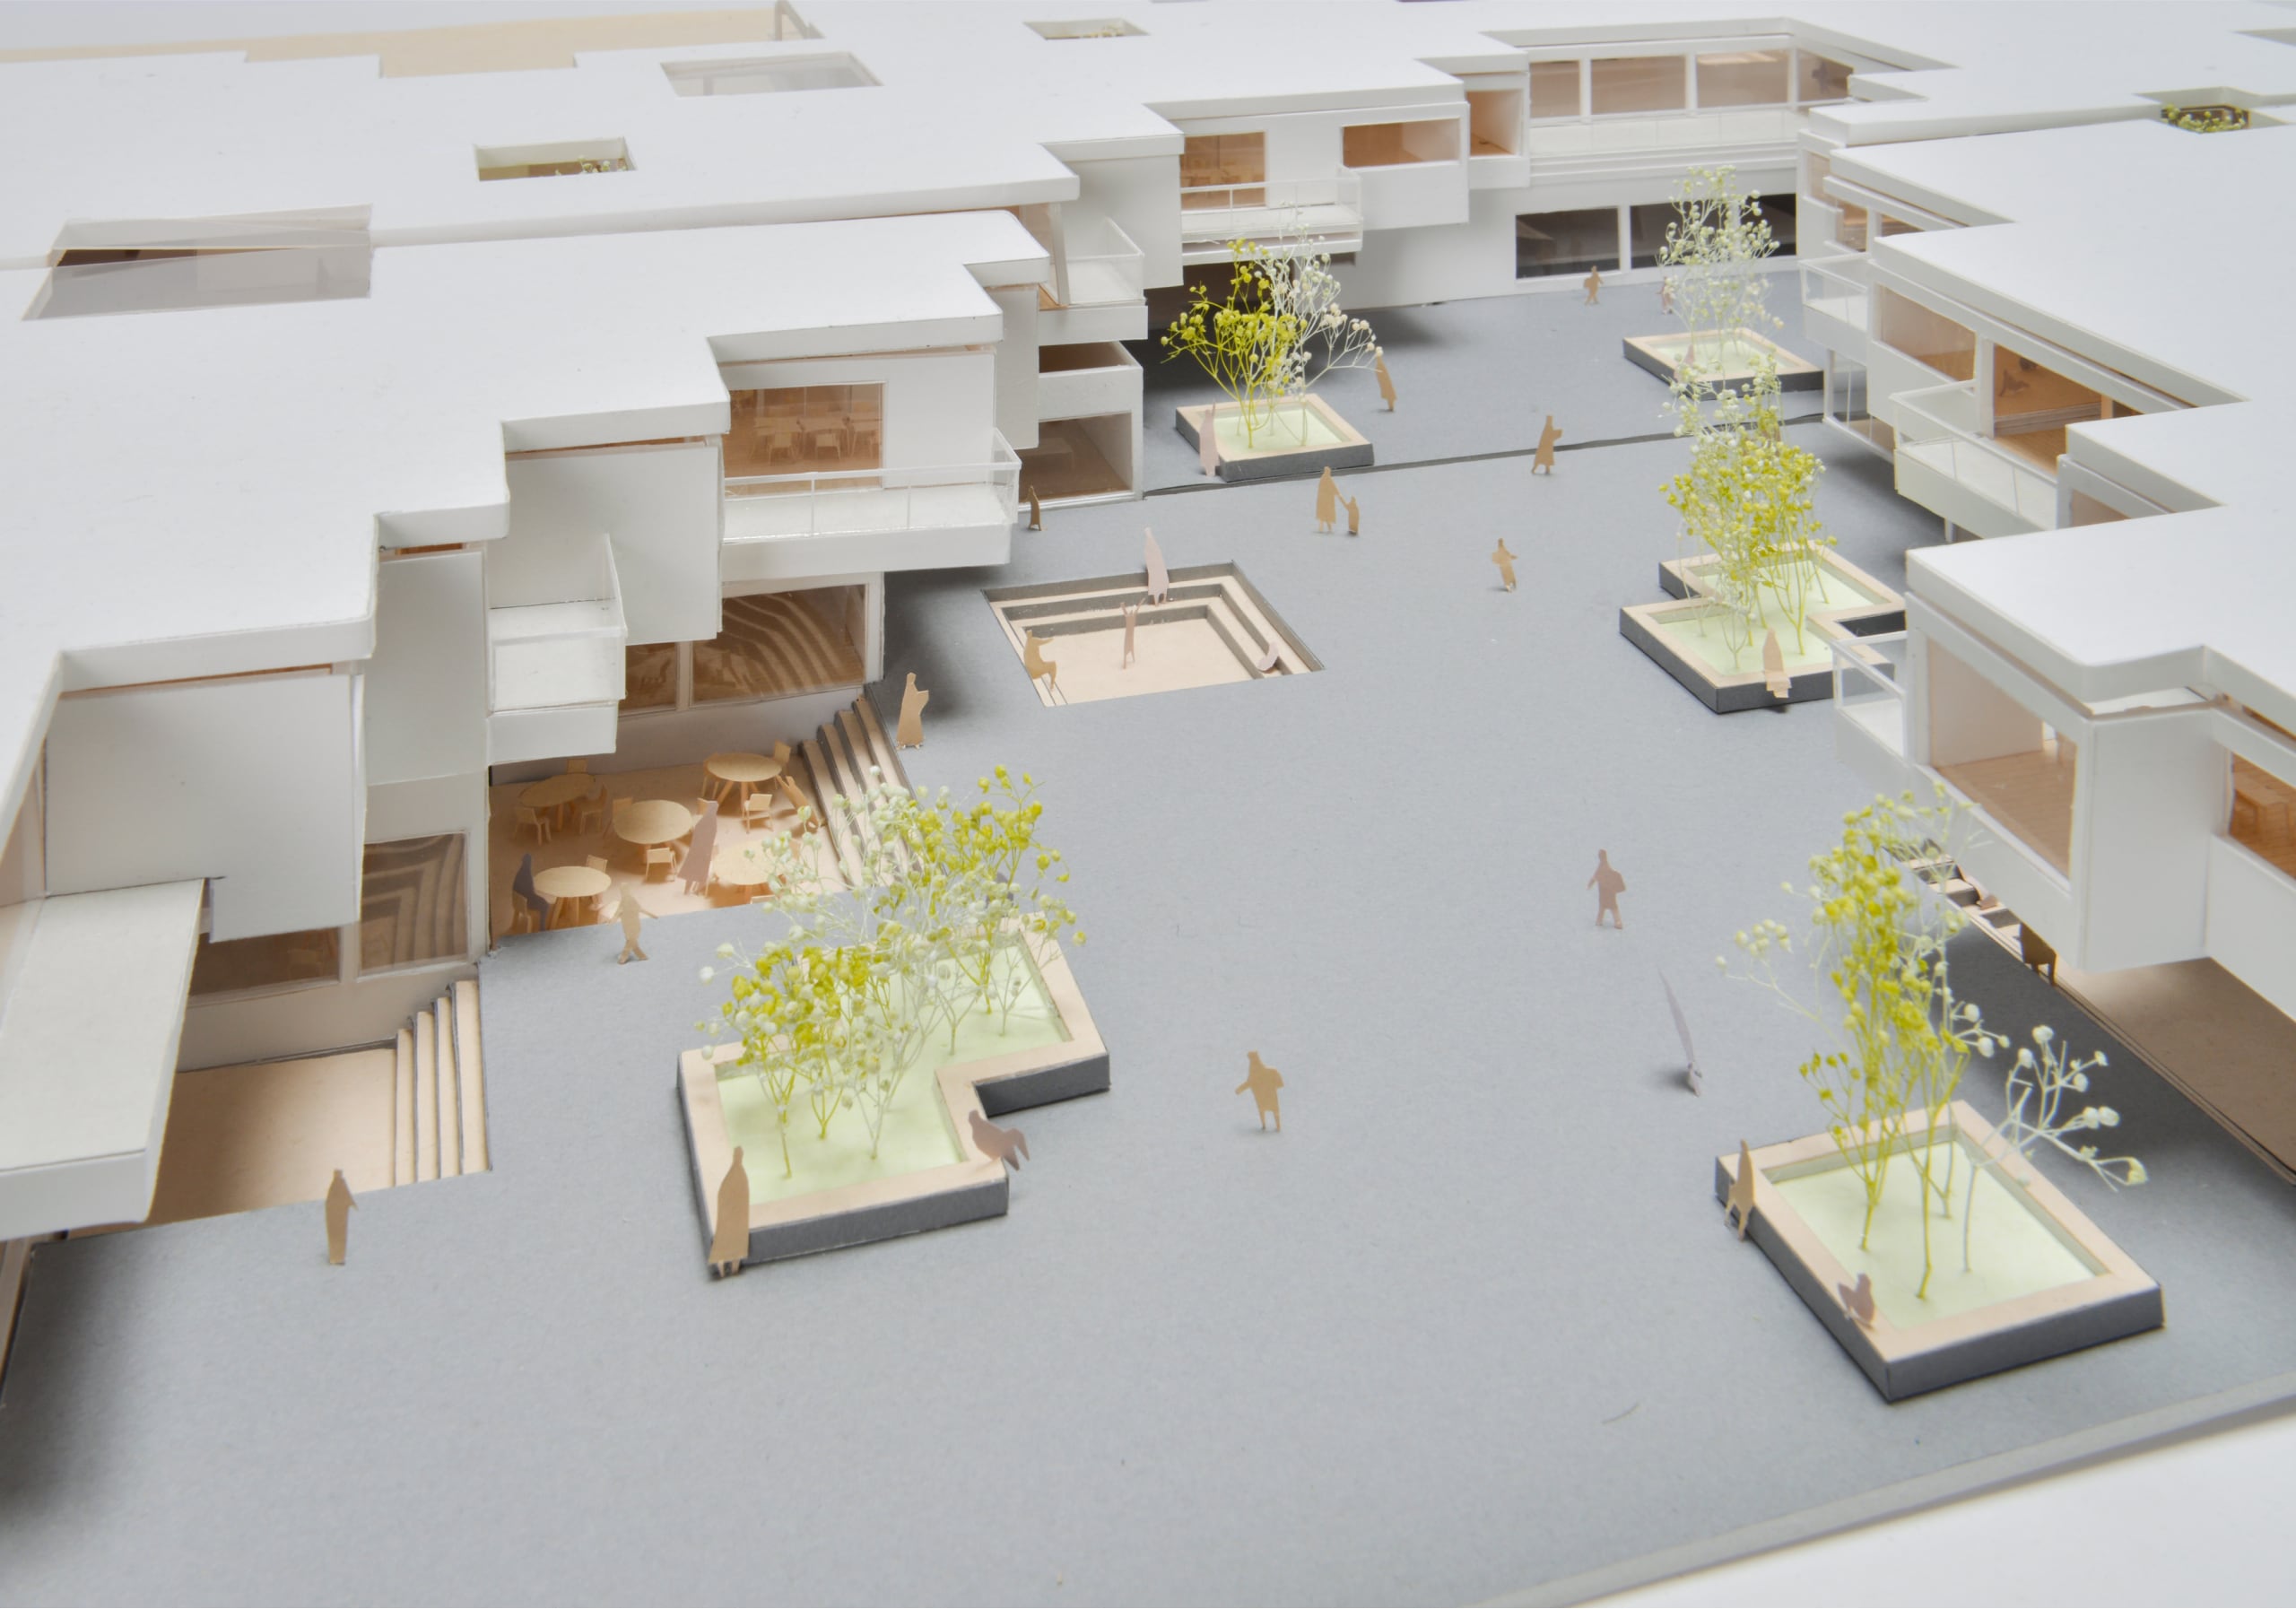 Hiregasaki - Regional Learning Place New Form of Primary School | Yusa Ito